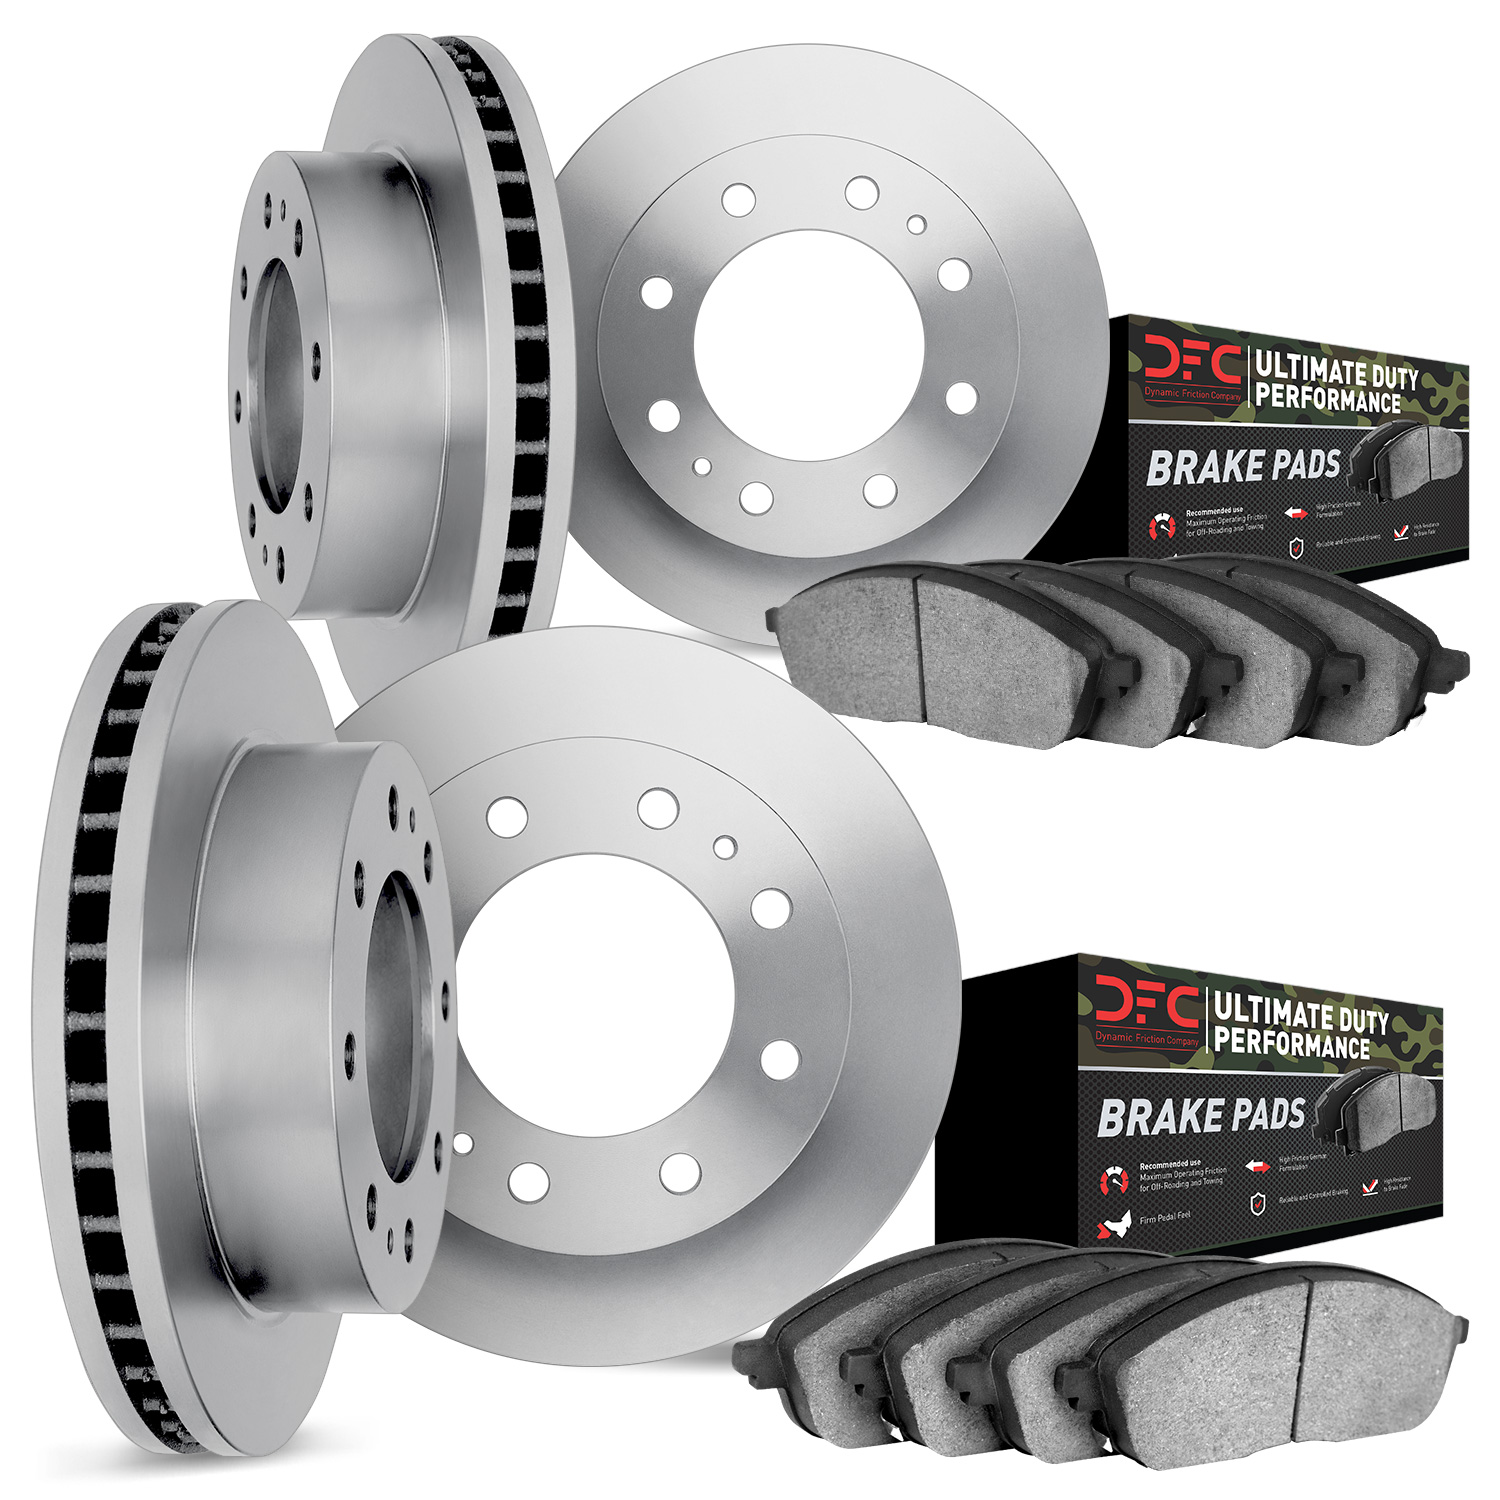 6404-54155 Brake Rotors with Ultimate-Duty Brake Pads, Fits Select Ford/Lincoln/Mercury/Mazda, Position: Front and Rear